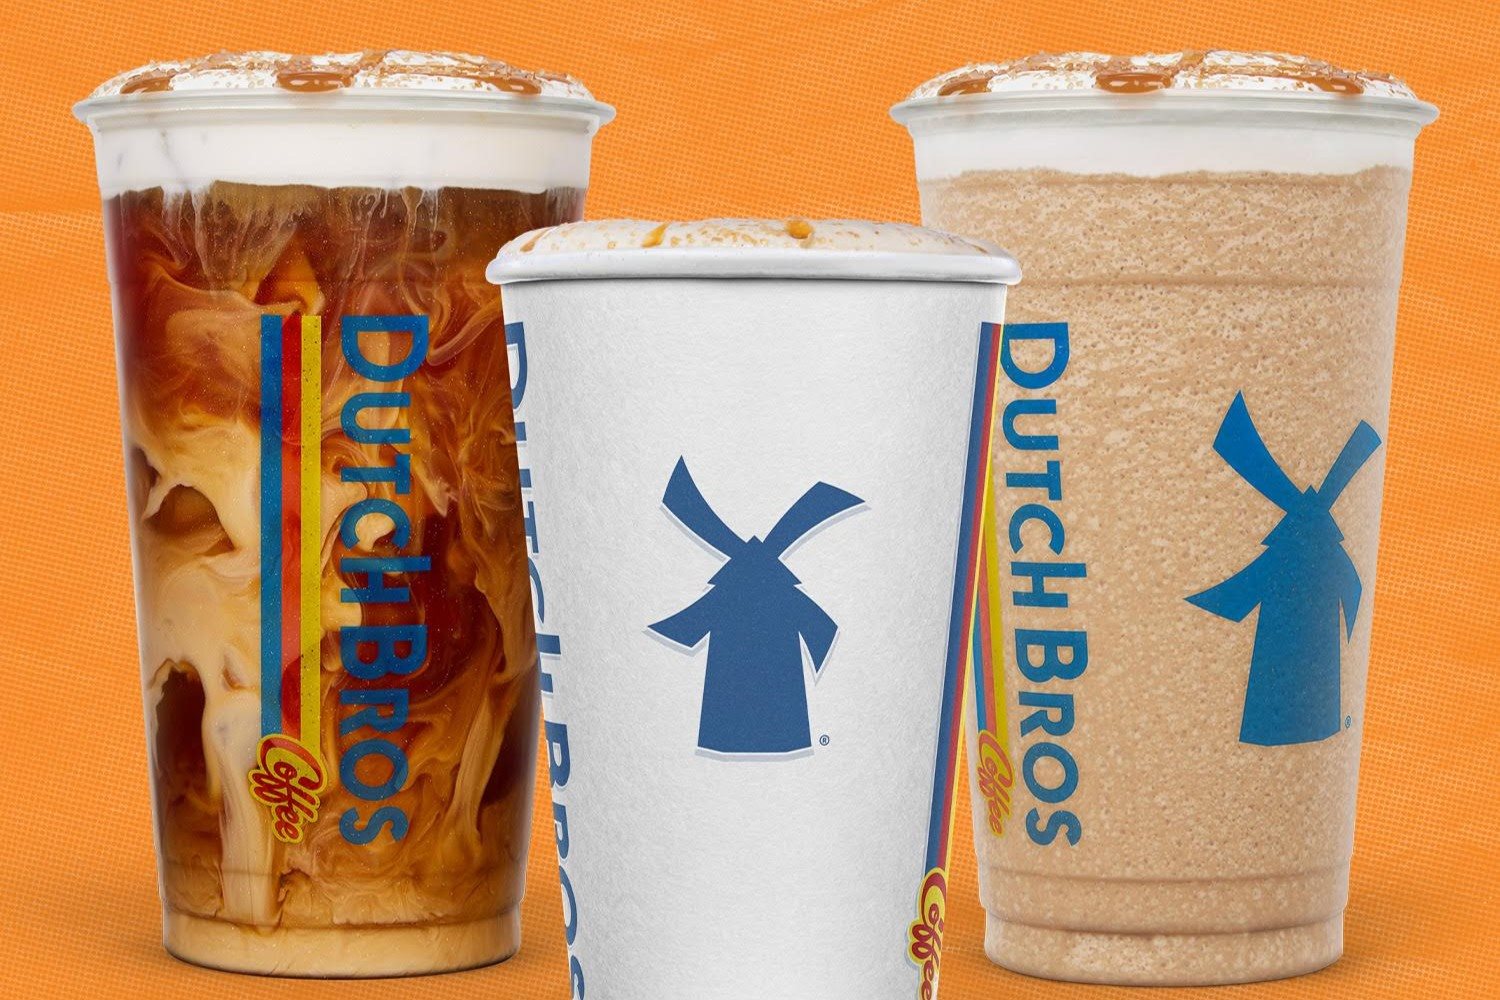 10-dutch-bros-soft-top-nutrition-facts